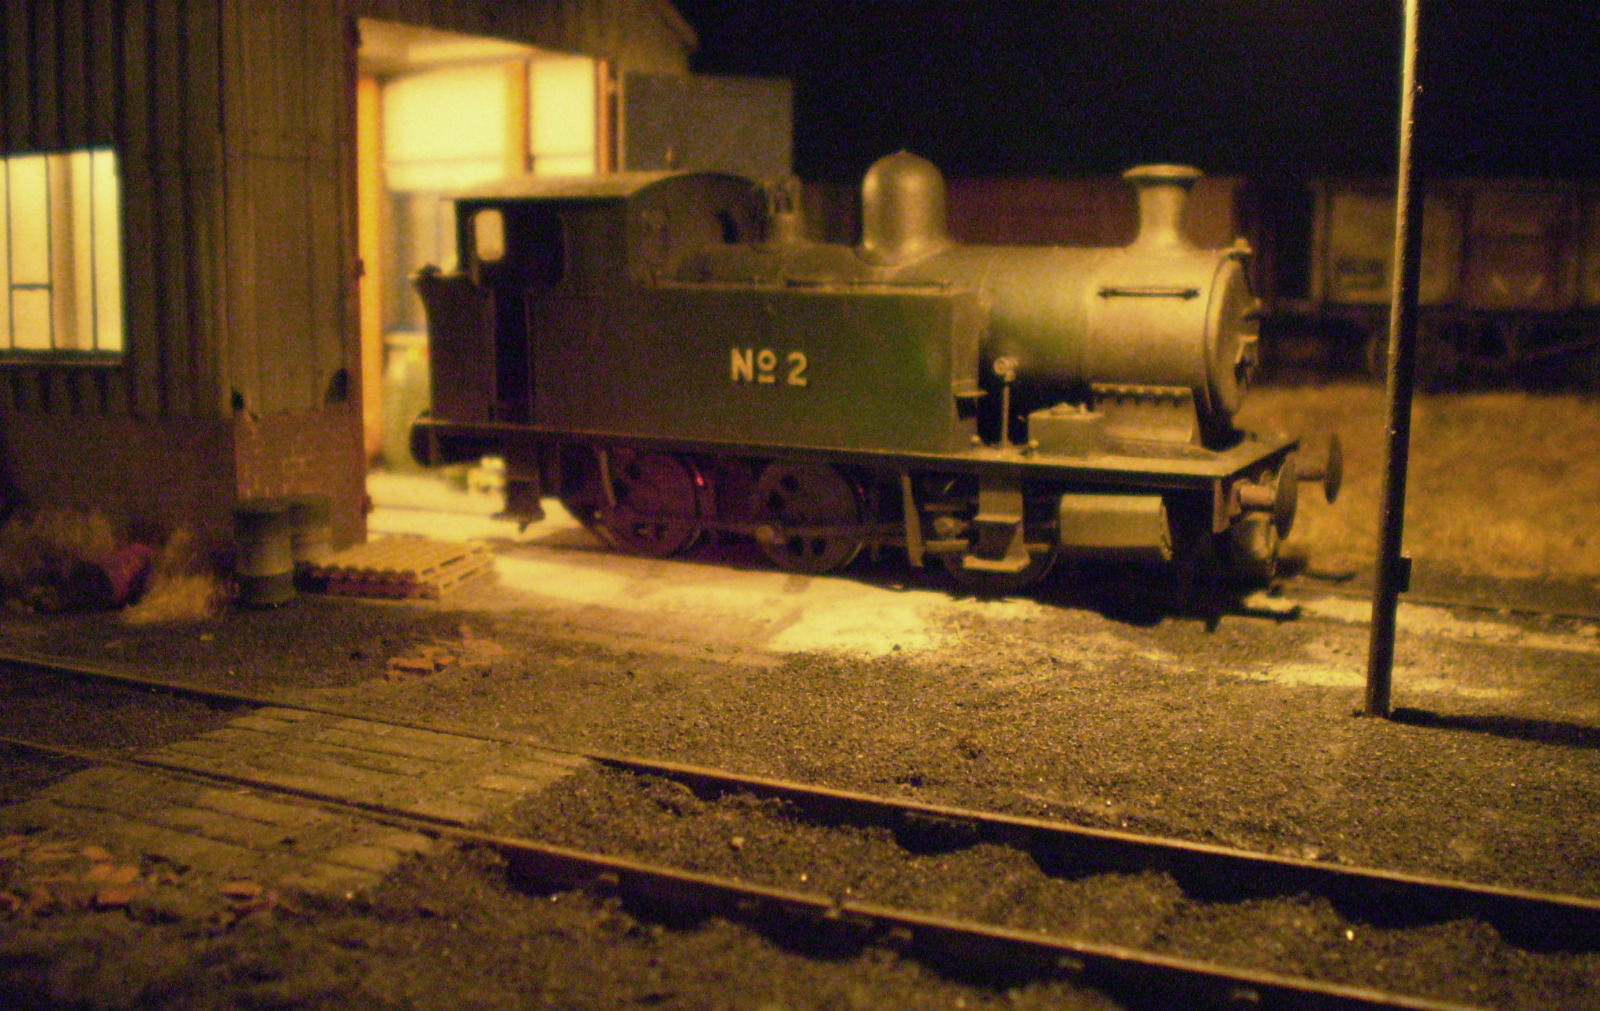 A nighttime scene of a model of No. 2 outside the shed